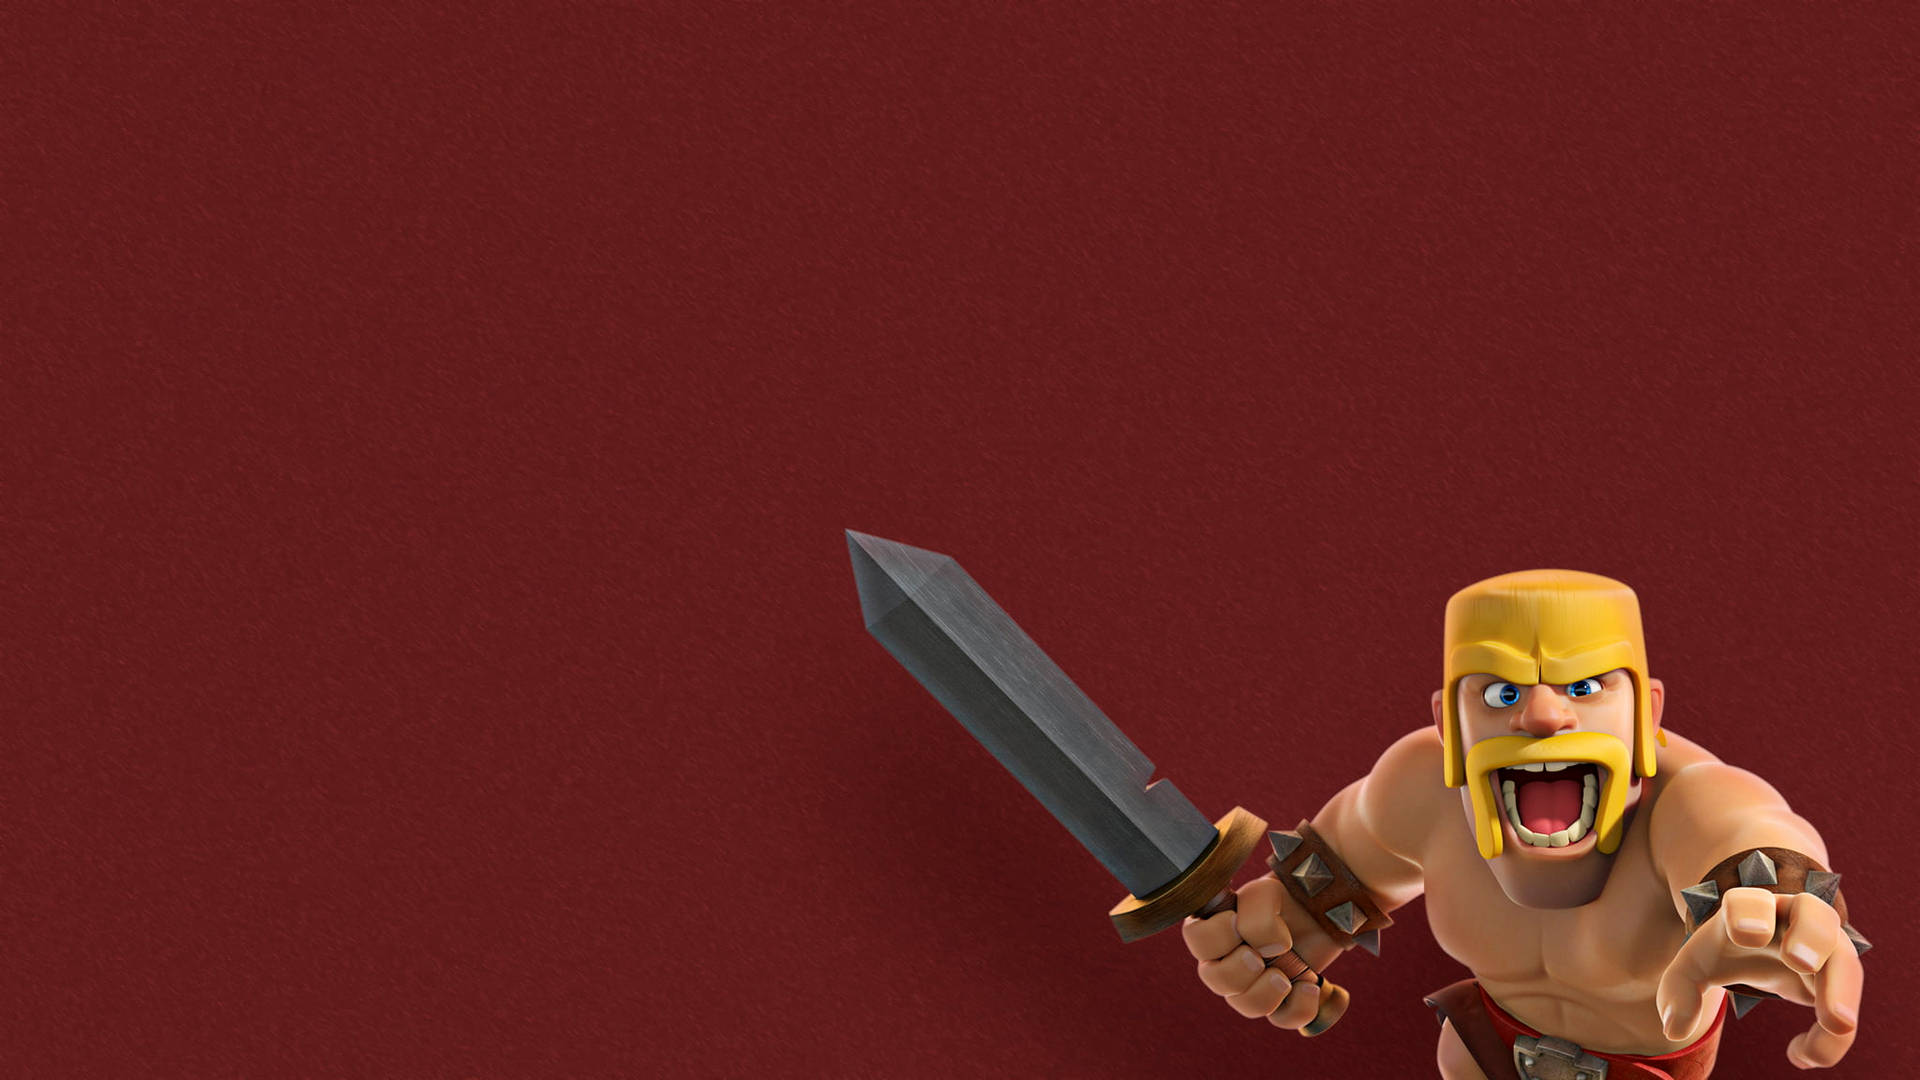 Barbarian With A Sword Clash Of Clans Background